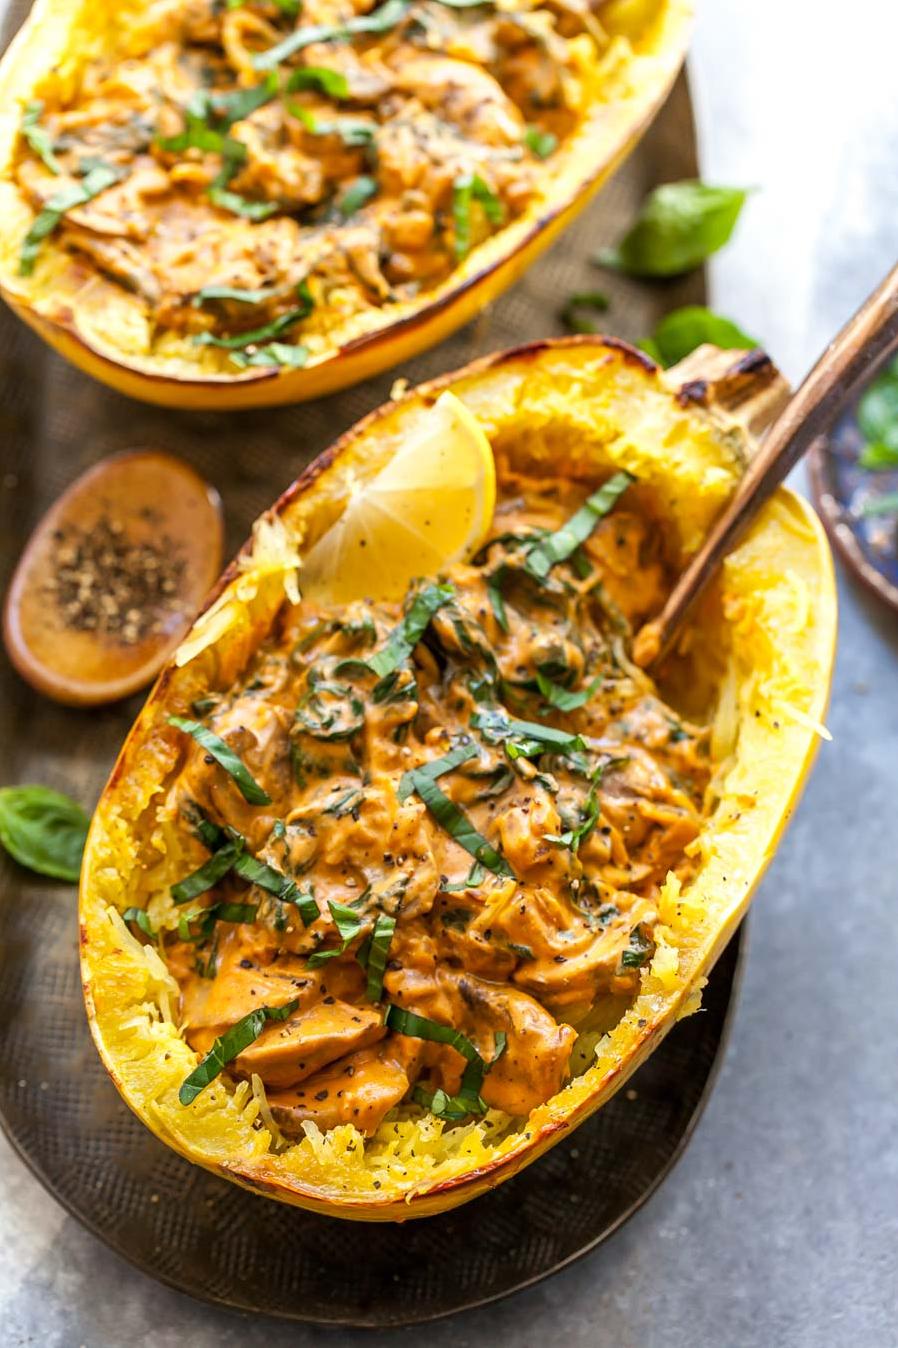  Pasta night finally becomes guilt-free with this vegan spaghetti squash and no-cheese sauce recipe.